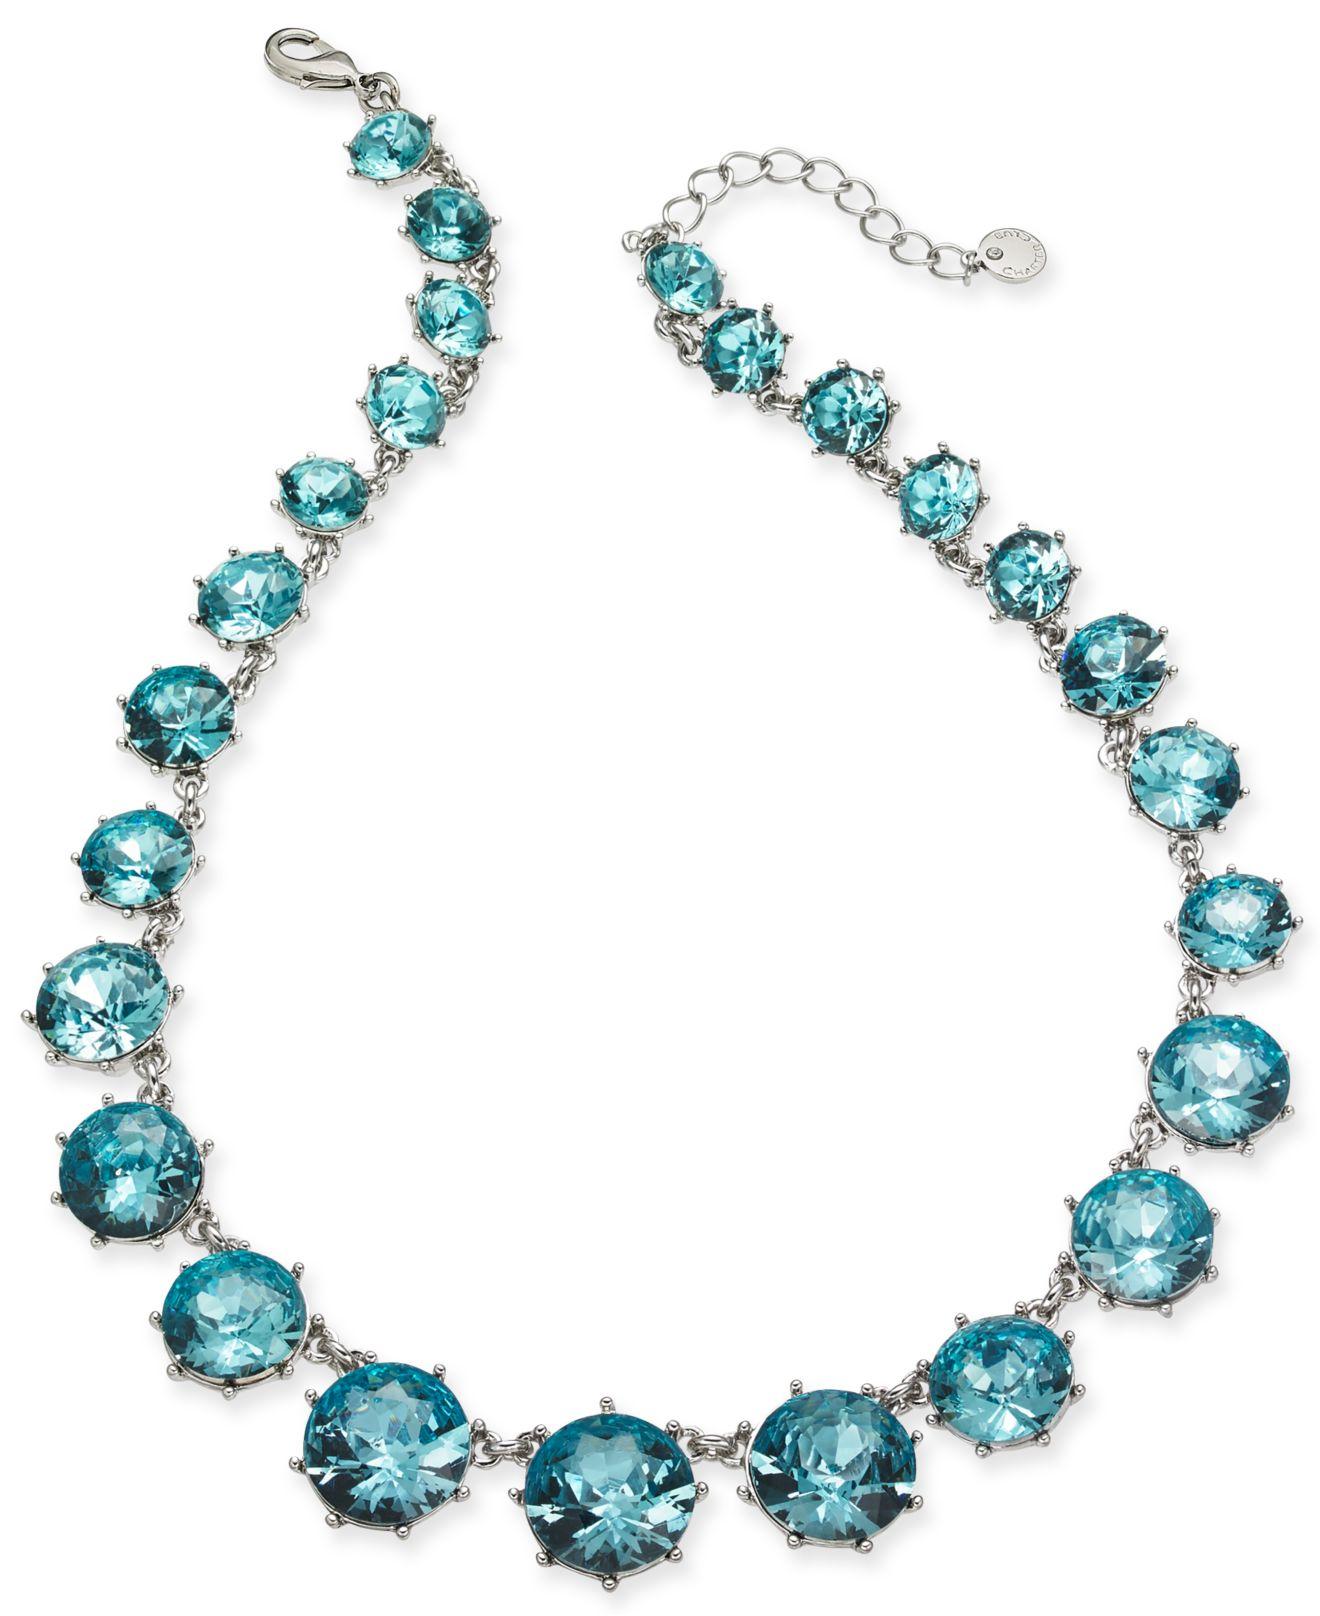 Charter Club Stone Collar Necklace, 17" + 2" Extender, Created For Macy